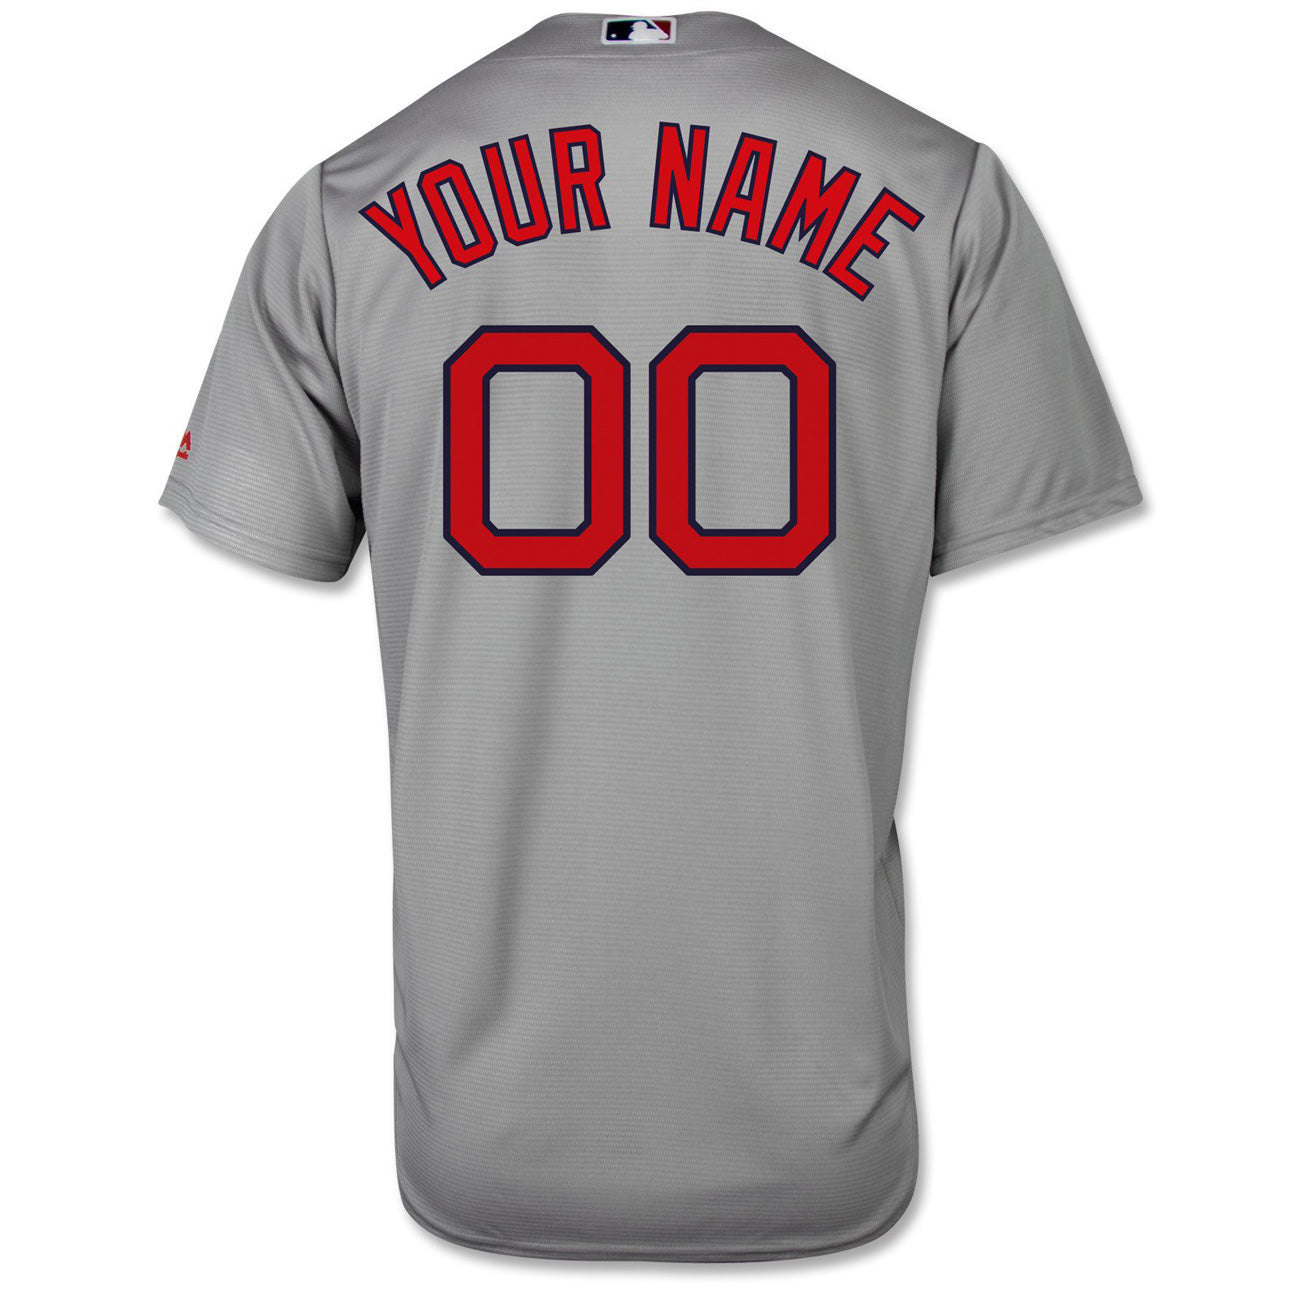 Boston Red Sox Personalized Jerseys Customized Shirts with Any Name and  Number